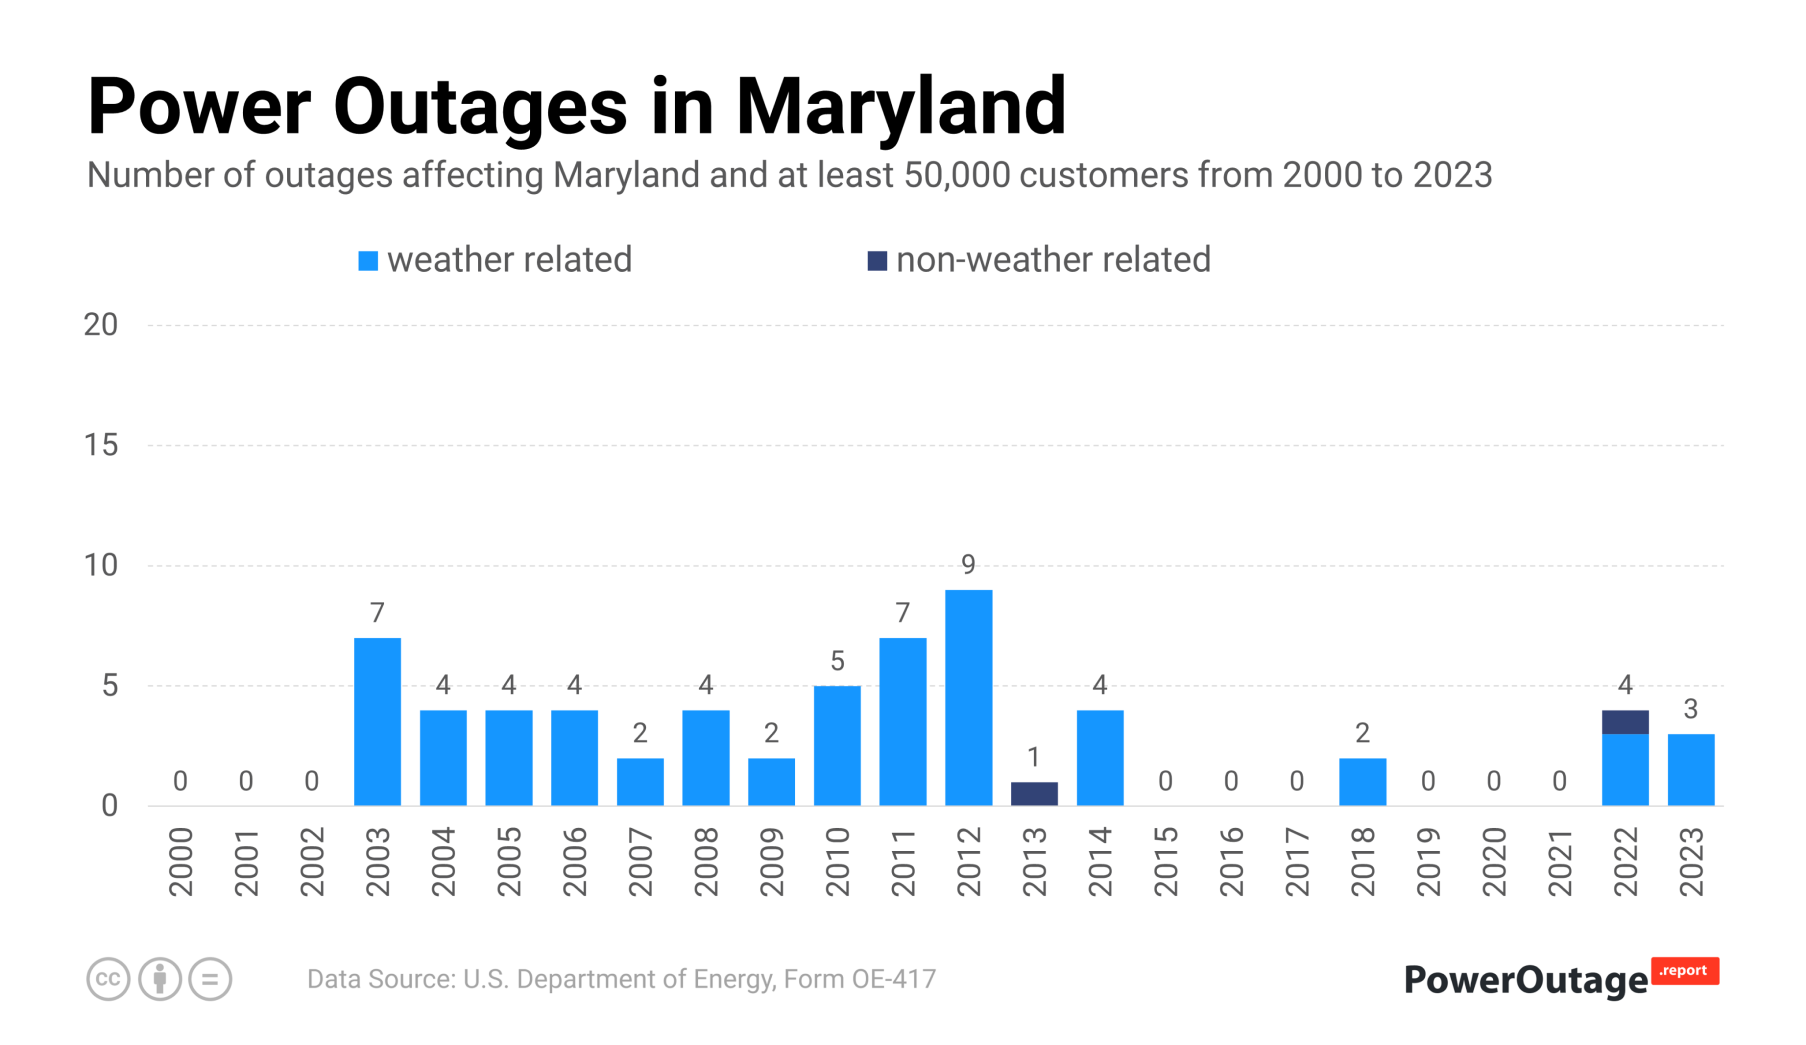 Maryland Power Outage Statistics (2000 - 2022)